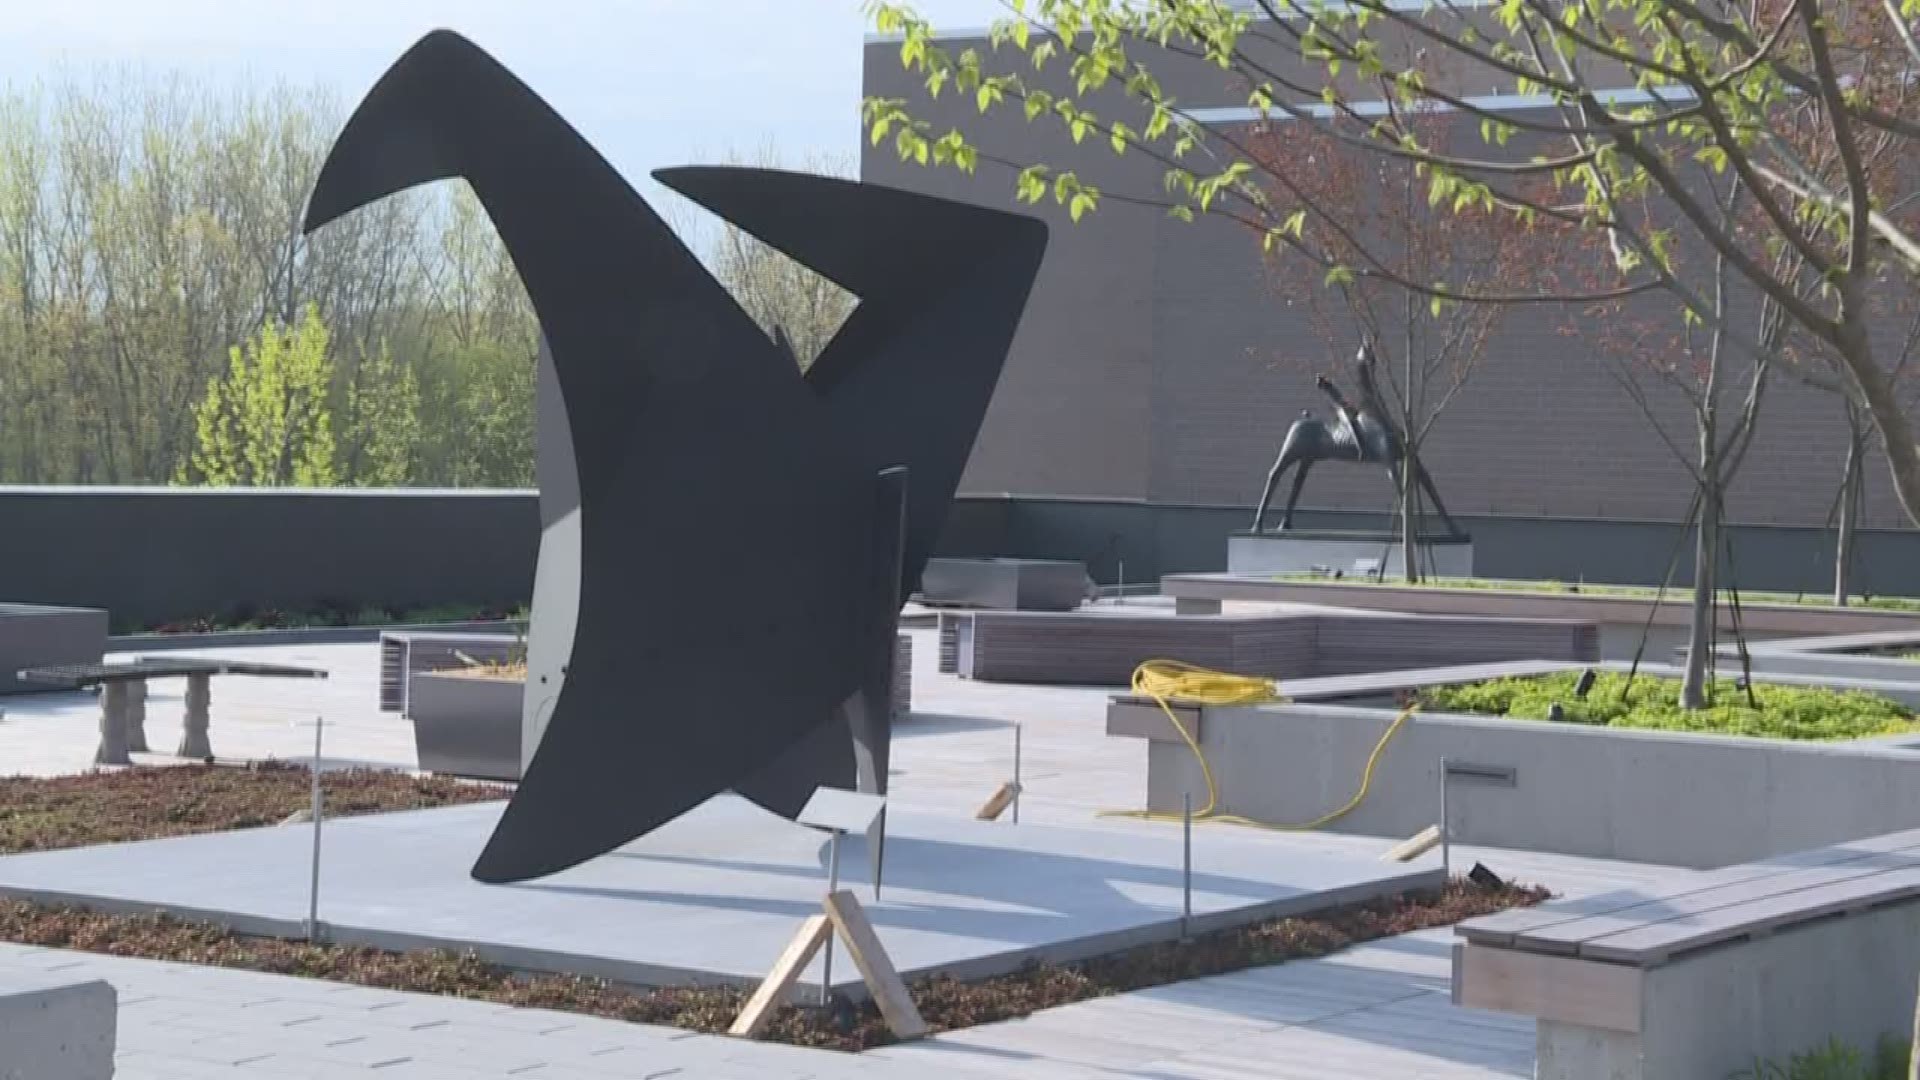 For the last couple weeks, the 13 ON YOUR SIDE Morning Show has been live from a different location in West Michigan. On Friday, May 17, Kamady Rudd and James Starks got a first look at the new rooftop garden space at the Frederik Meijer Gardens in Grand Rapids.